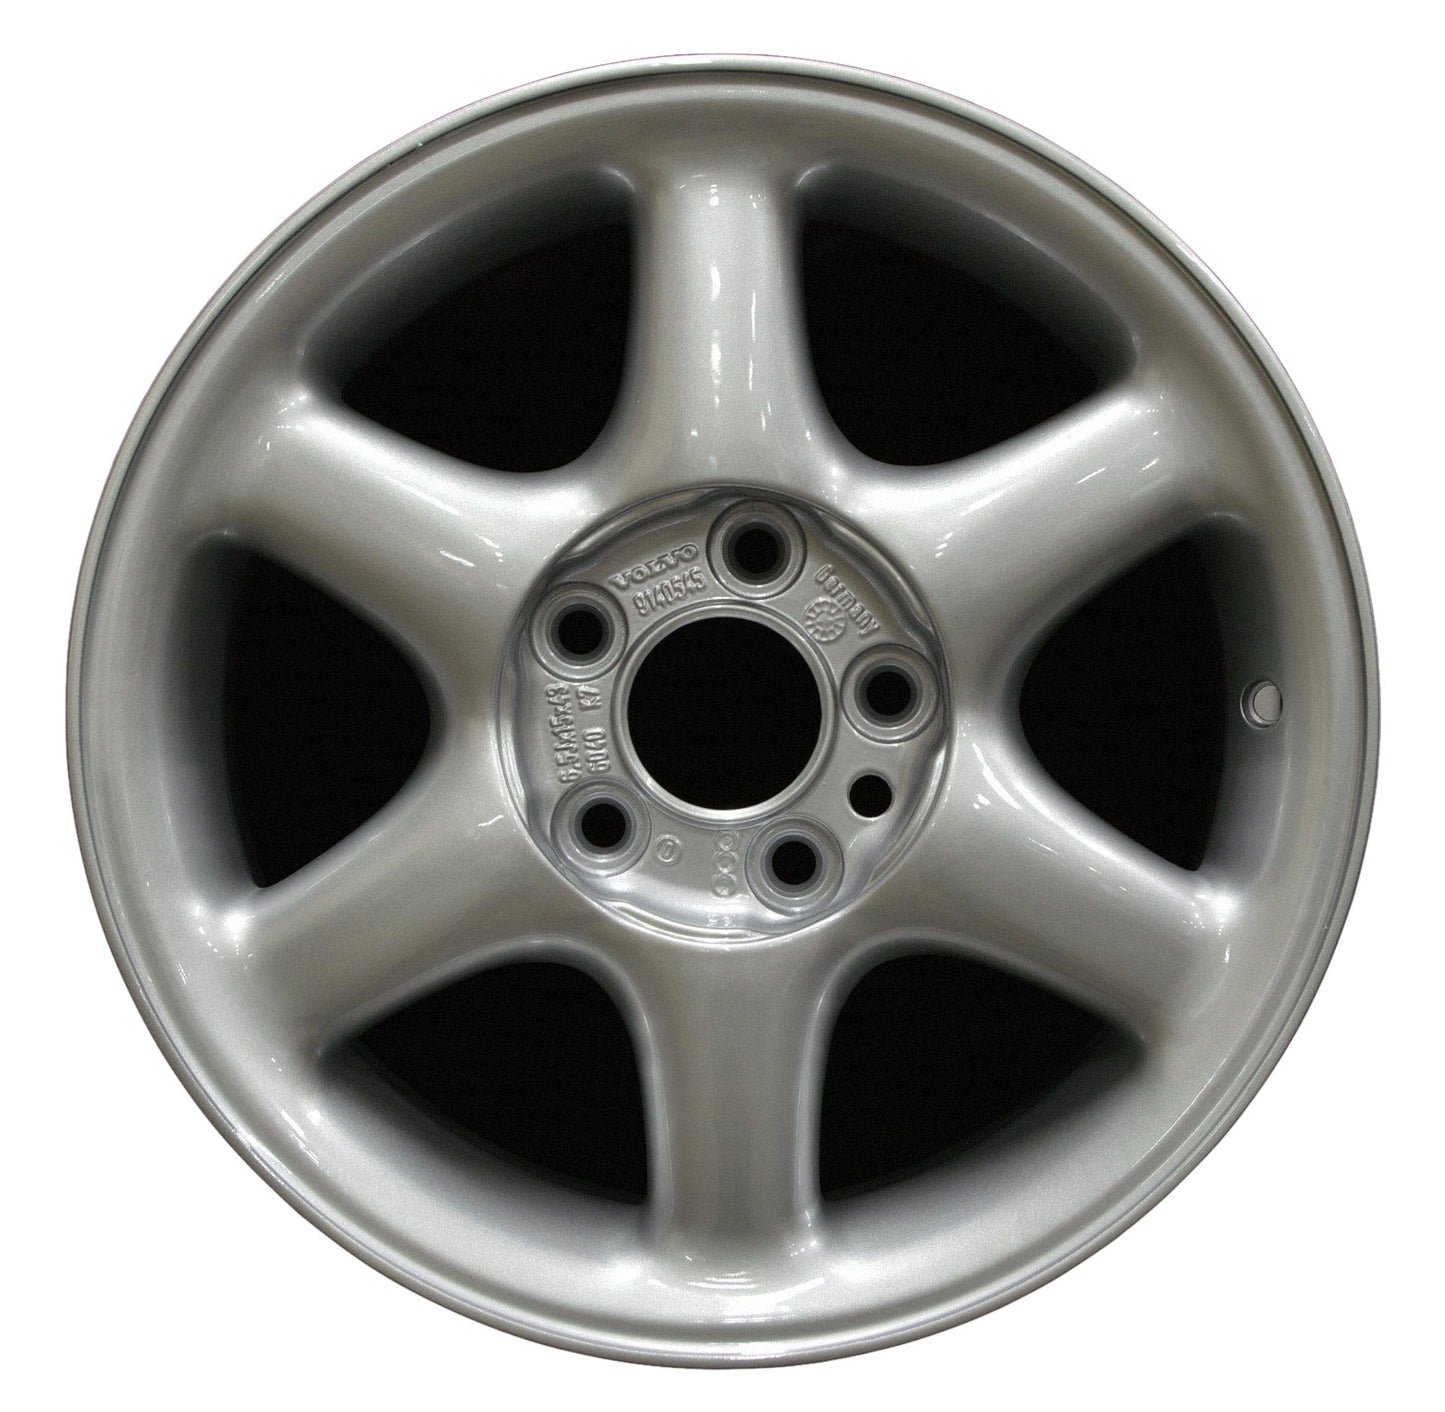 Volvo 70 Series  1998, 1999, 2000 Factory OEM Car Wheel Size 15x6.5 Alloy WAO.70190.PS07.FF